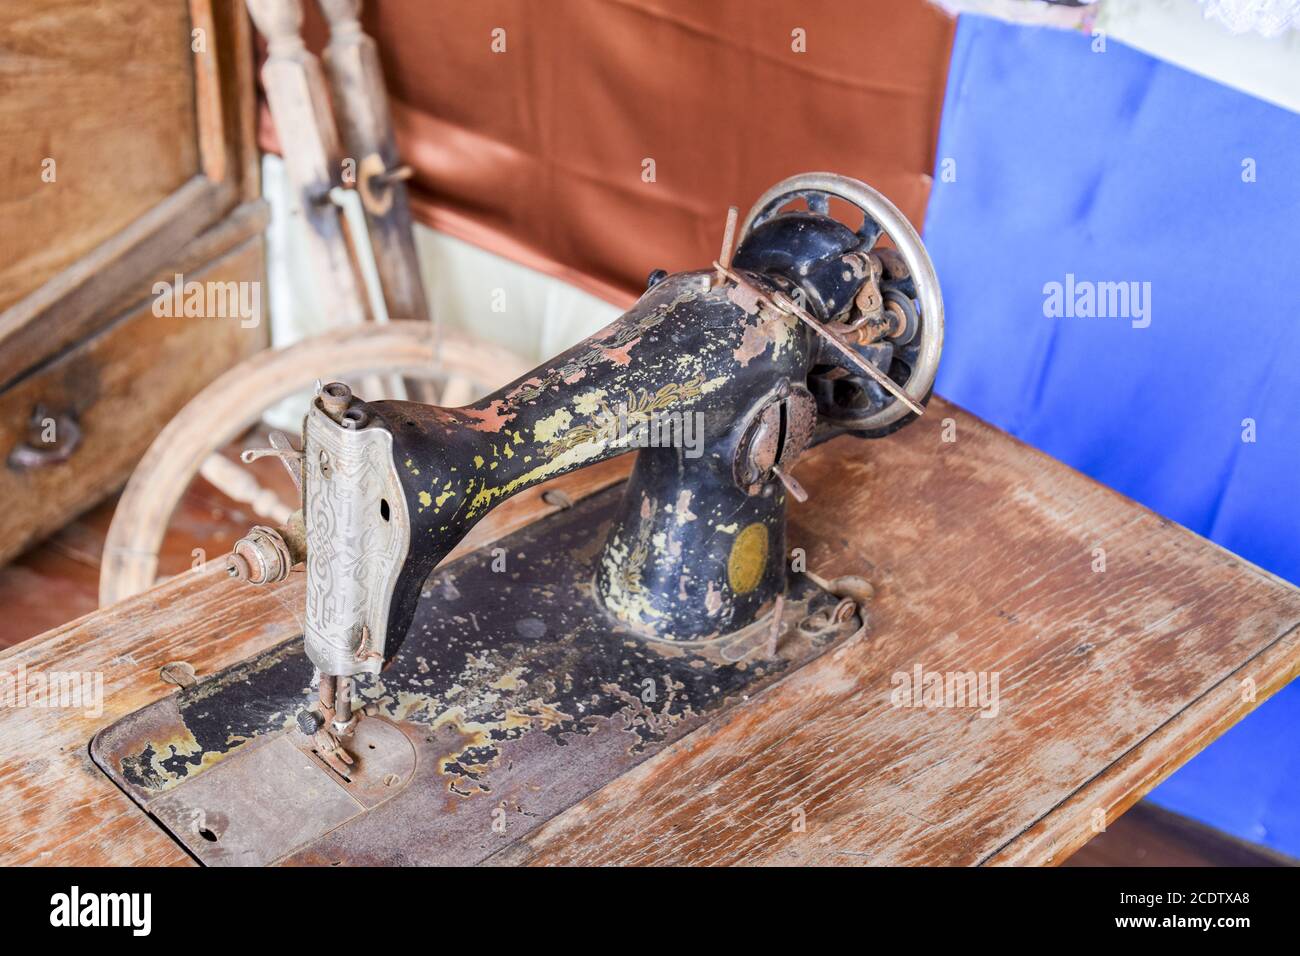 The old manual sewing machine Stock Photo